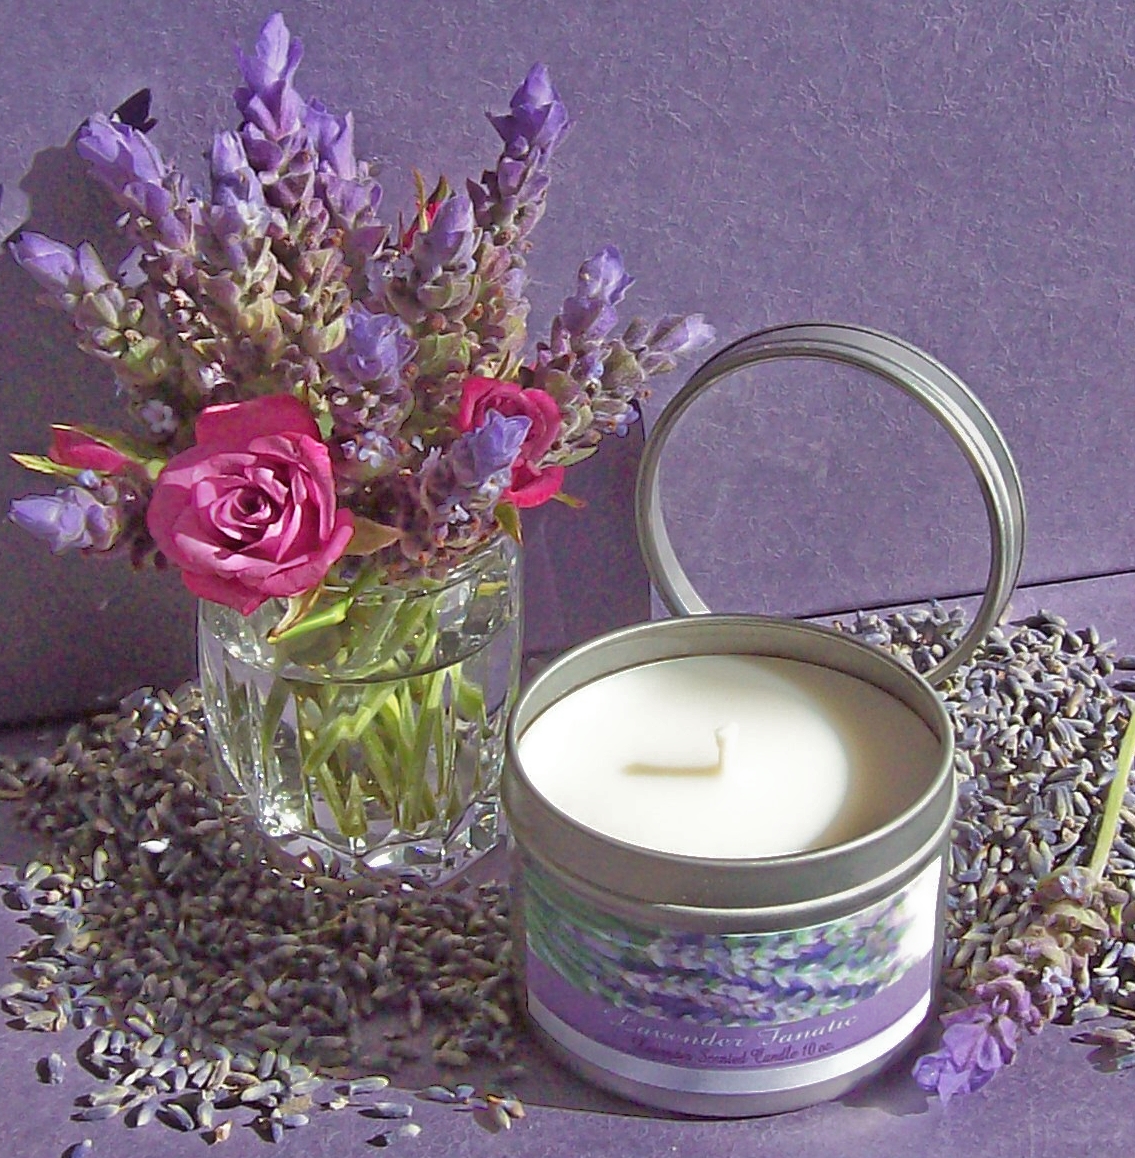 Lavender Candles-Aromatherapy products by Lavender Fanatic.